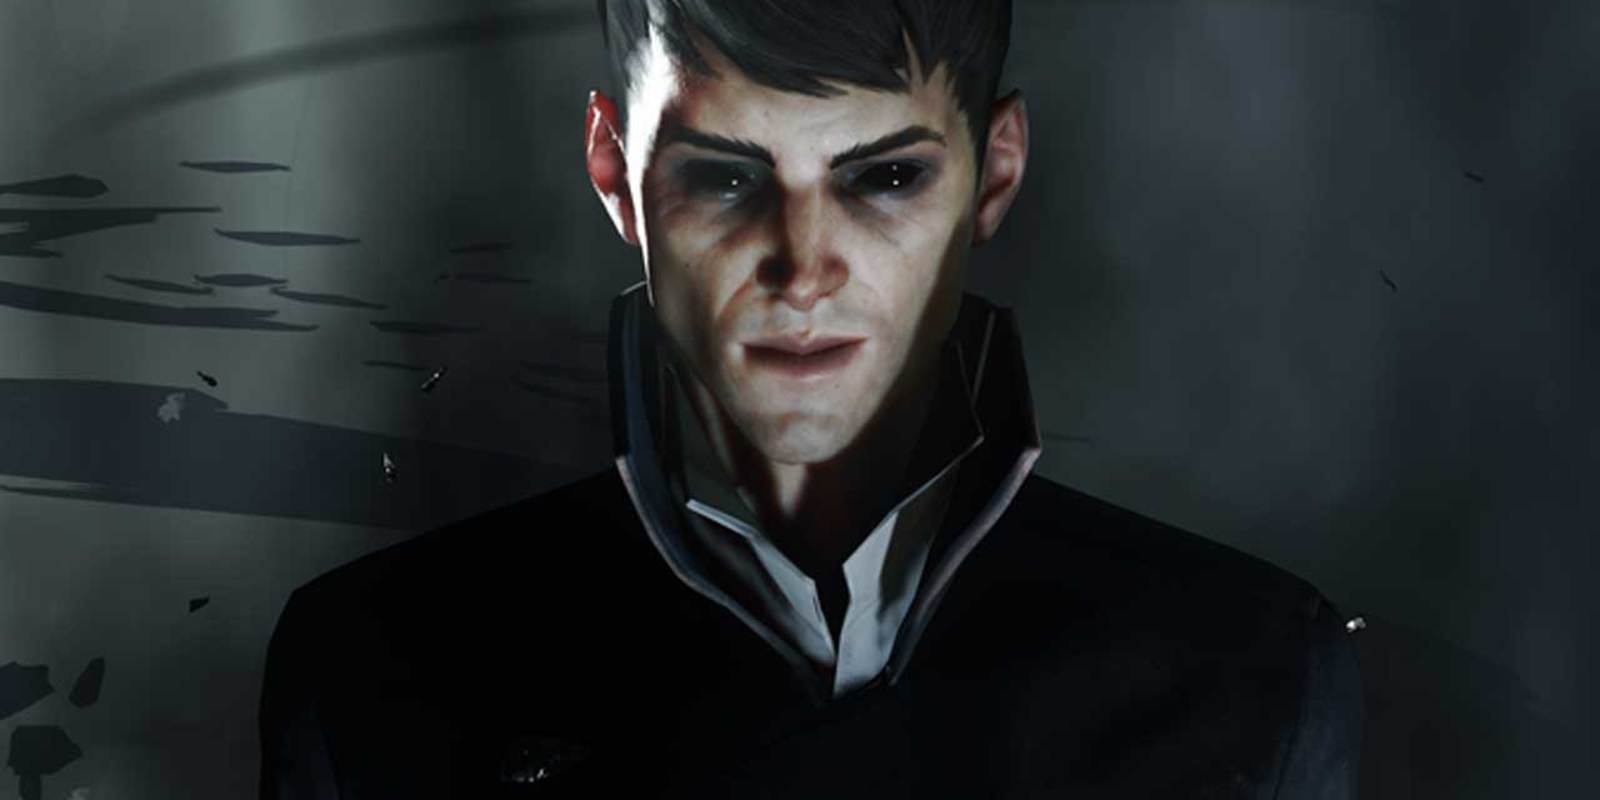 dishonored 2 tips beginners 0